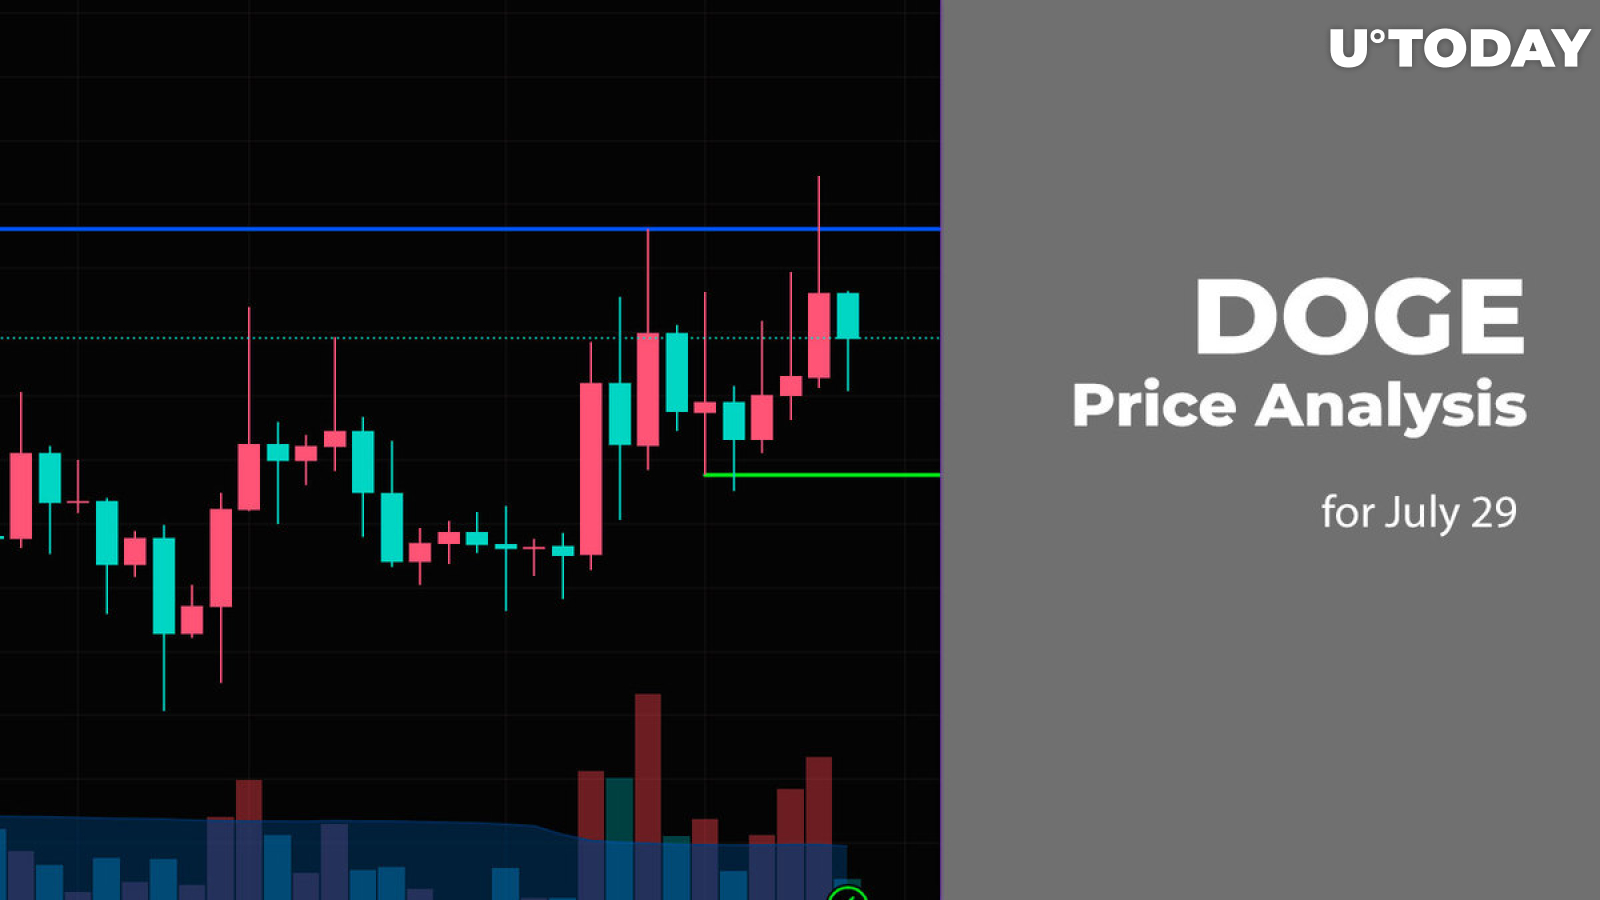 DOGE Price Analysis for July 29